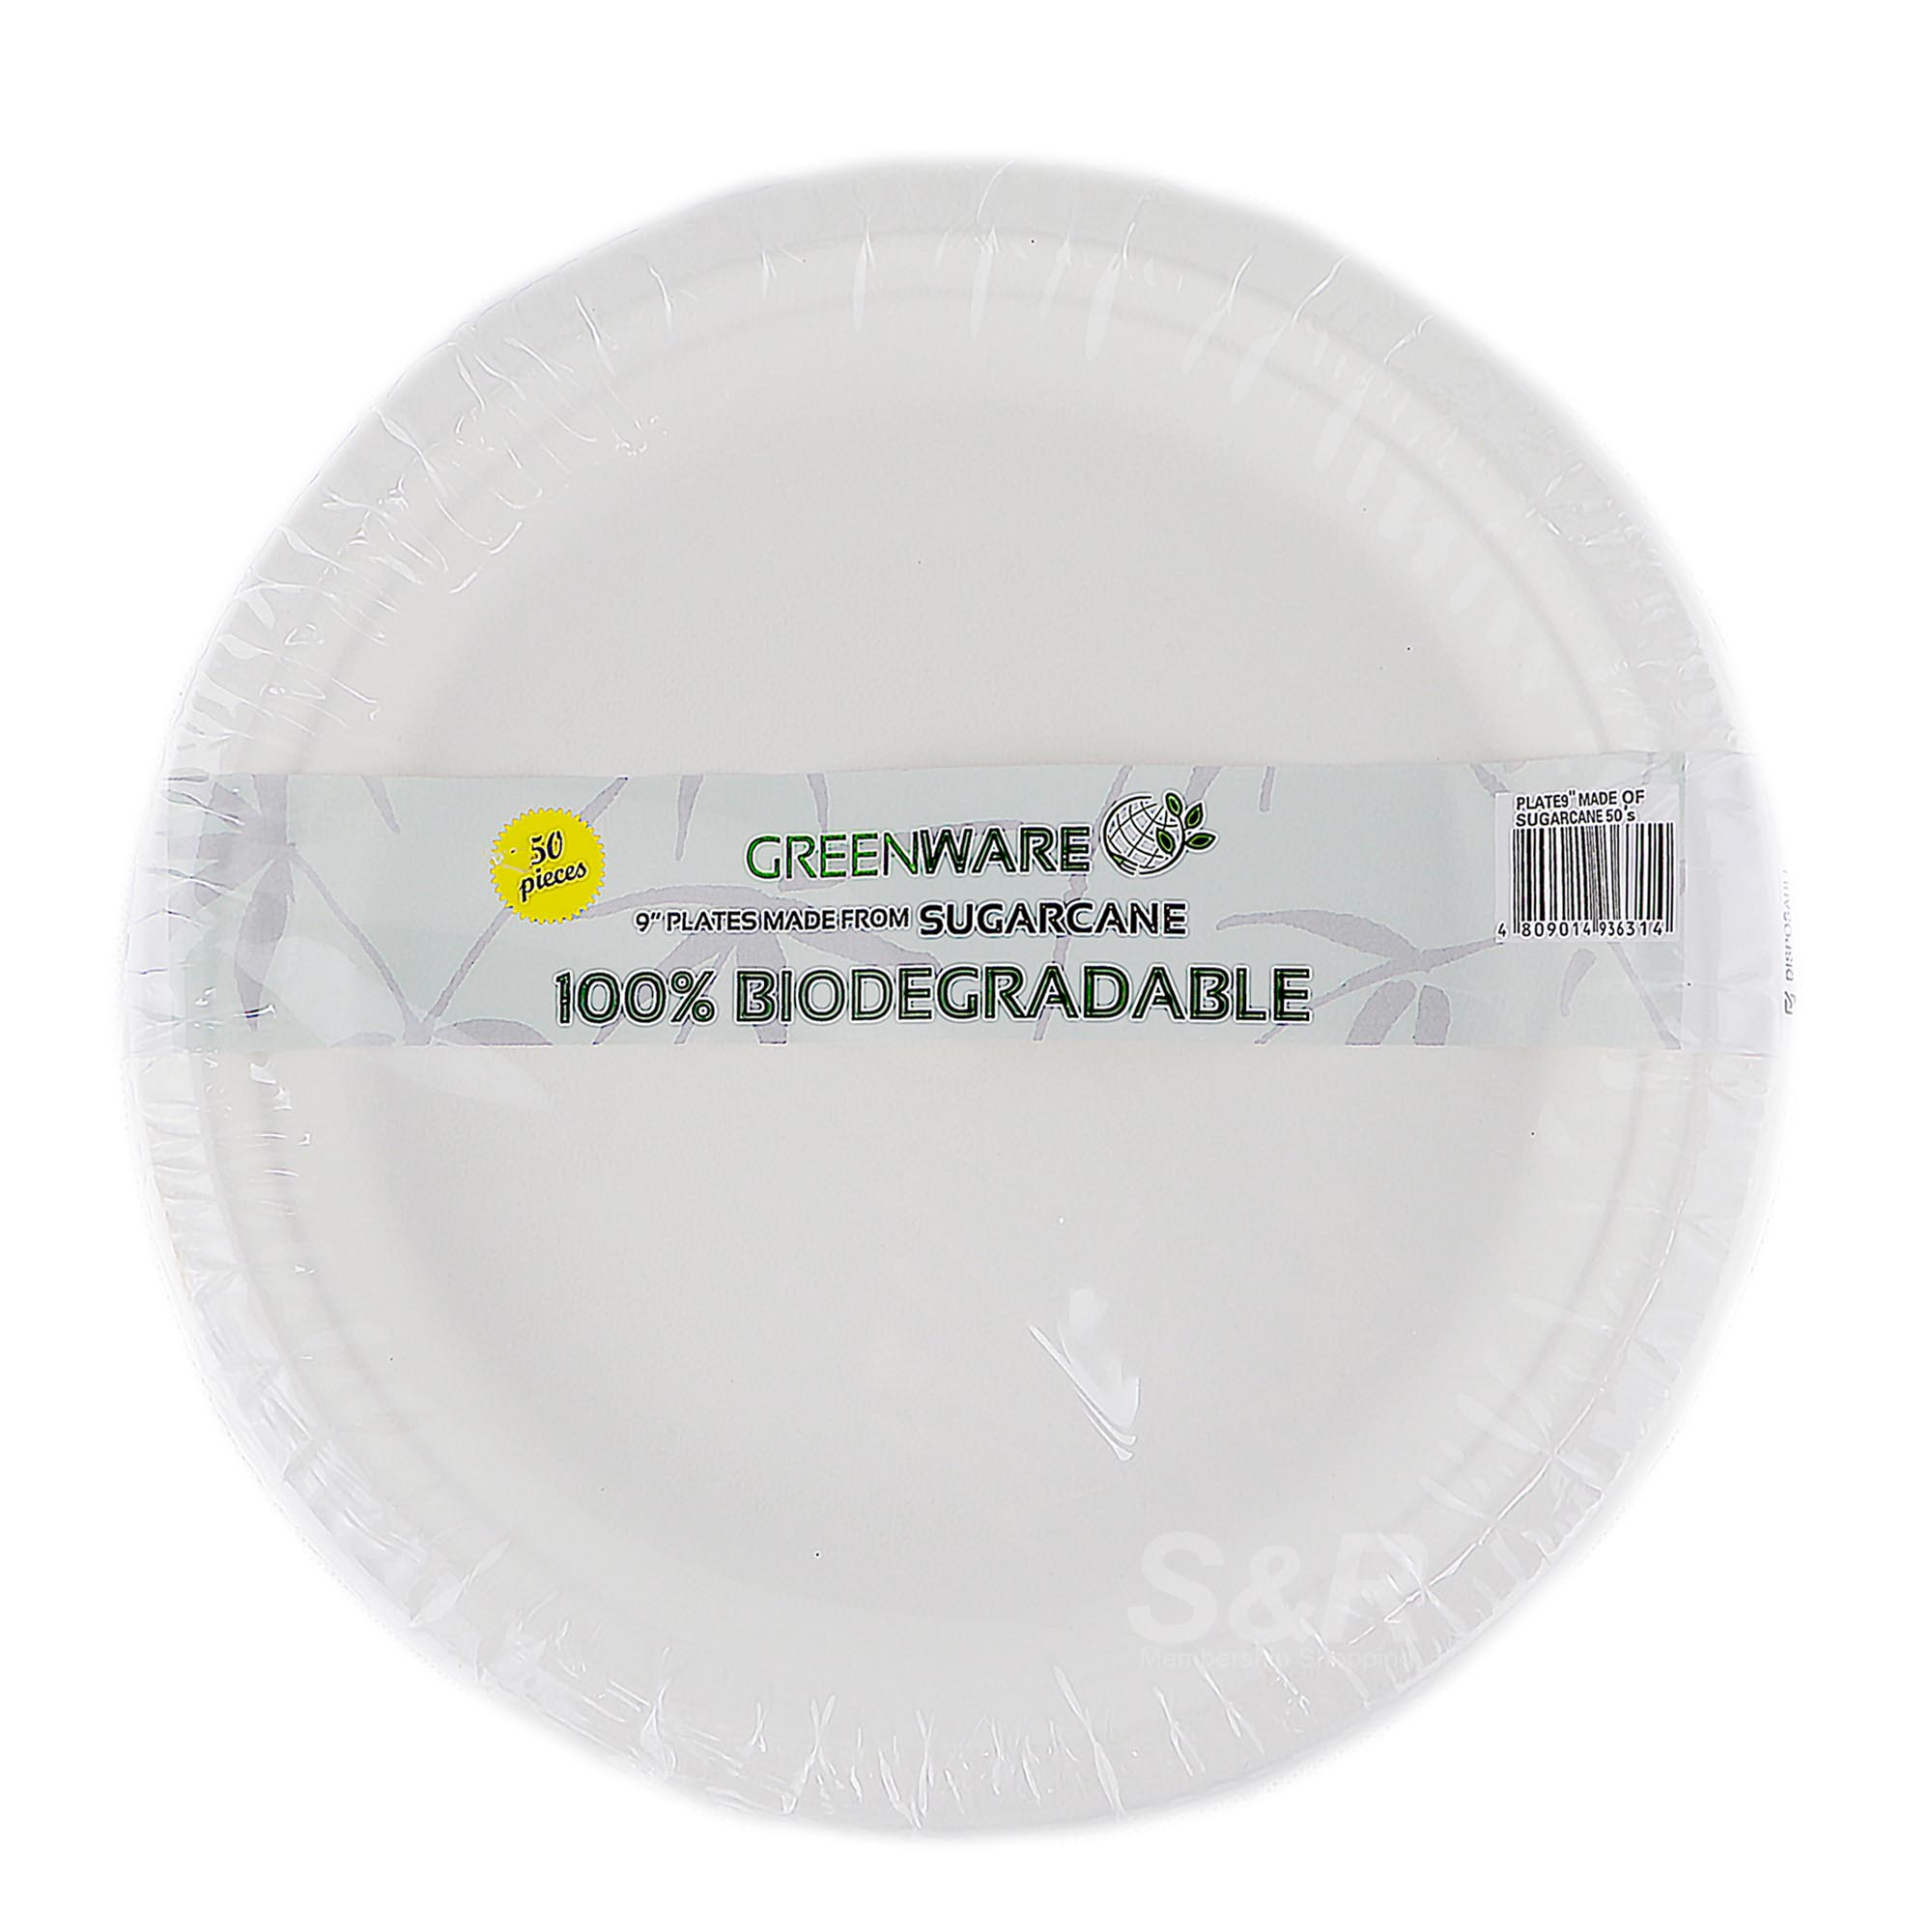 https://www.snrshopping.com/upload/product/Greenware-9-inch-Biodegradable-Plates-50pcs-1240/Greenware%209inch%20Biodegradable%20Plates%2050pcs-qyiFNROqZT.jpg